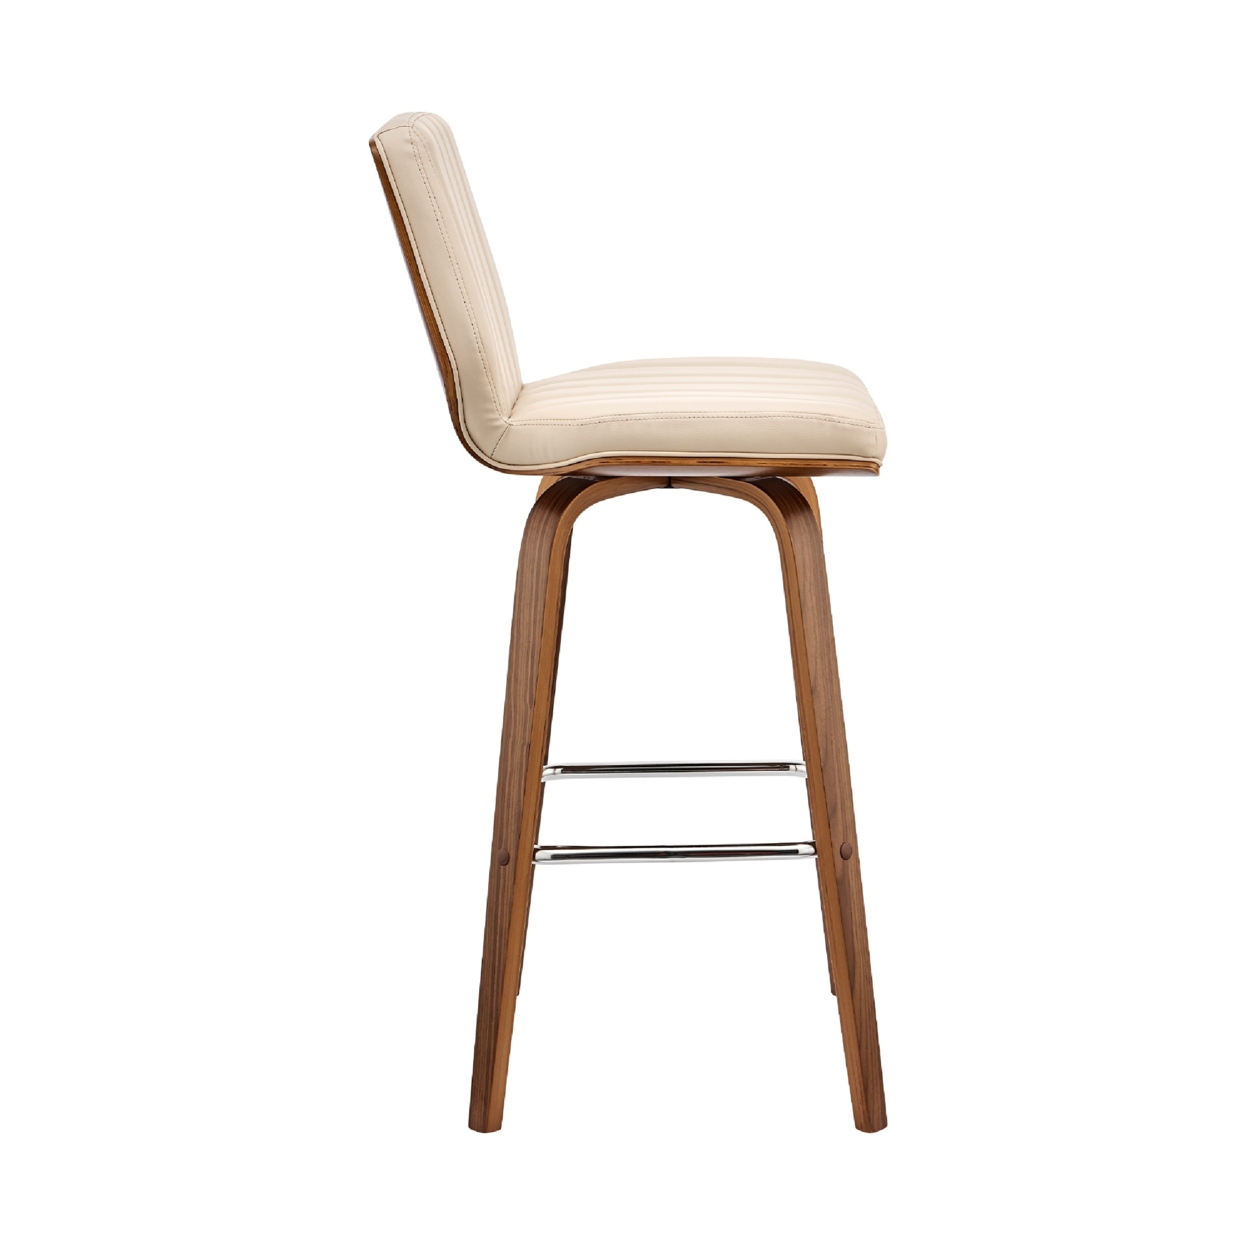 Swivel Barstool With Channel Stitching And Wooden Support, Cream And Brown- Saltoro Sherpi